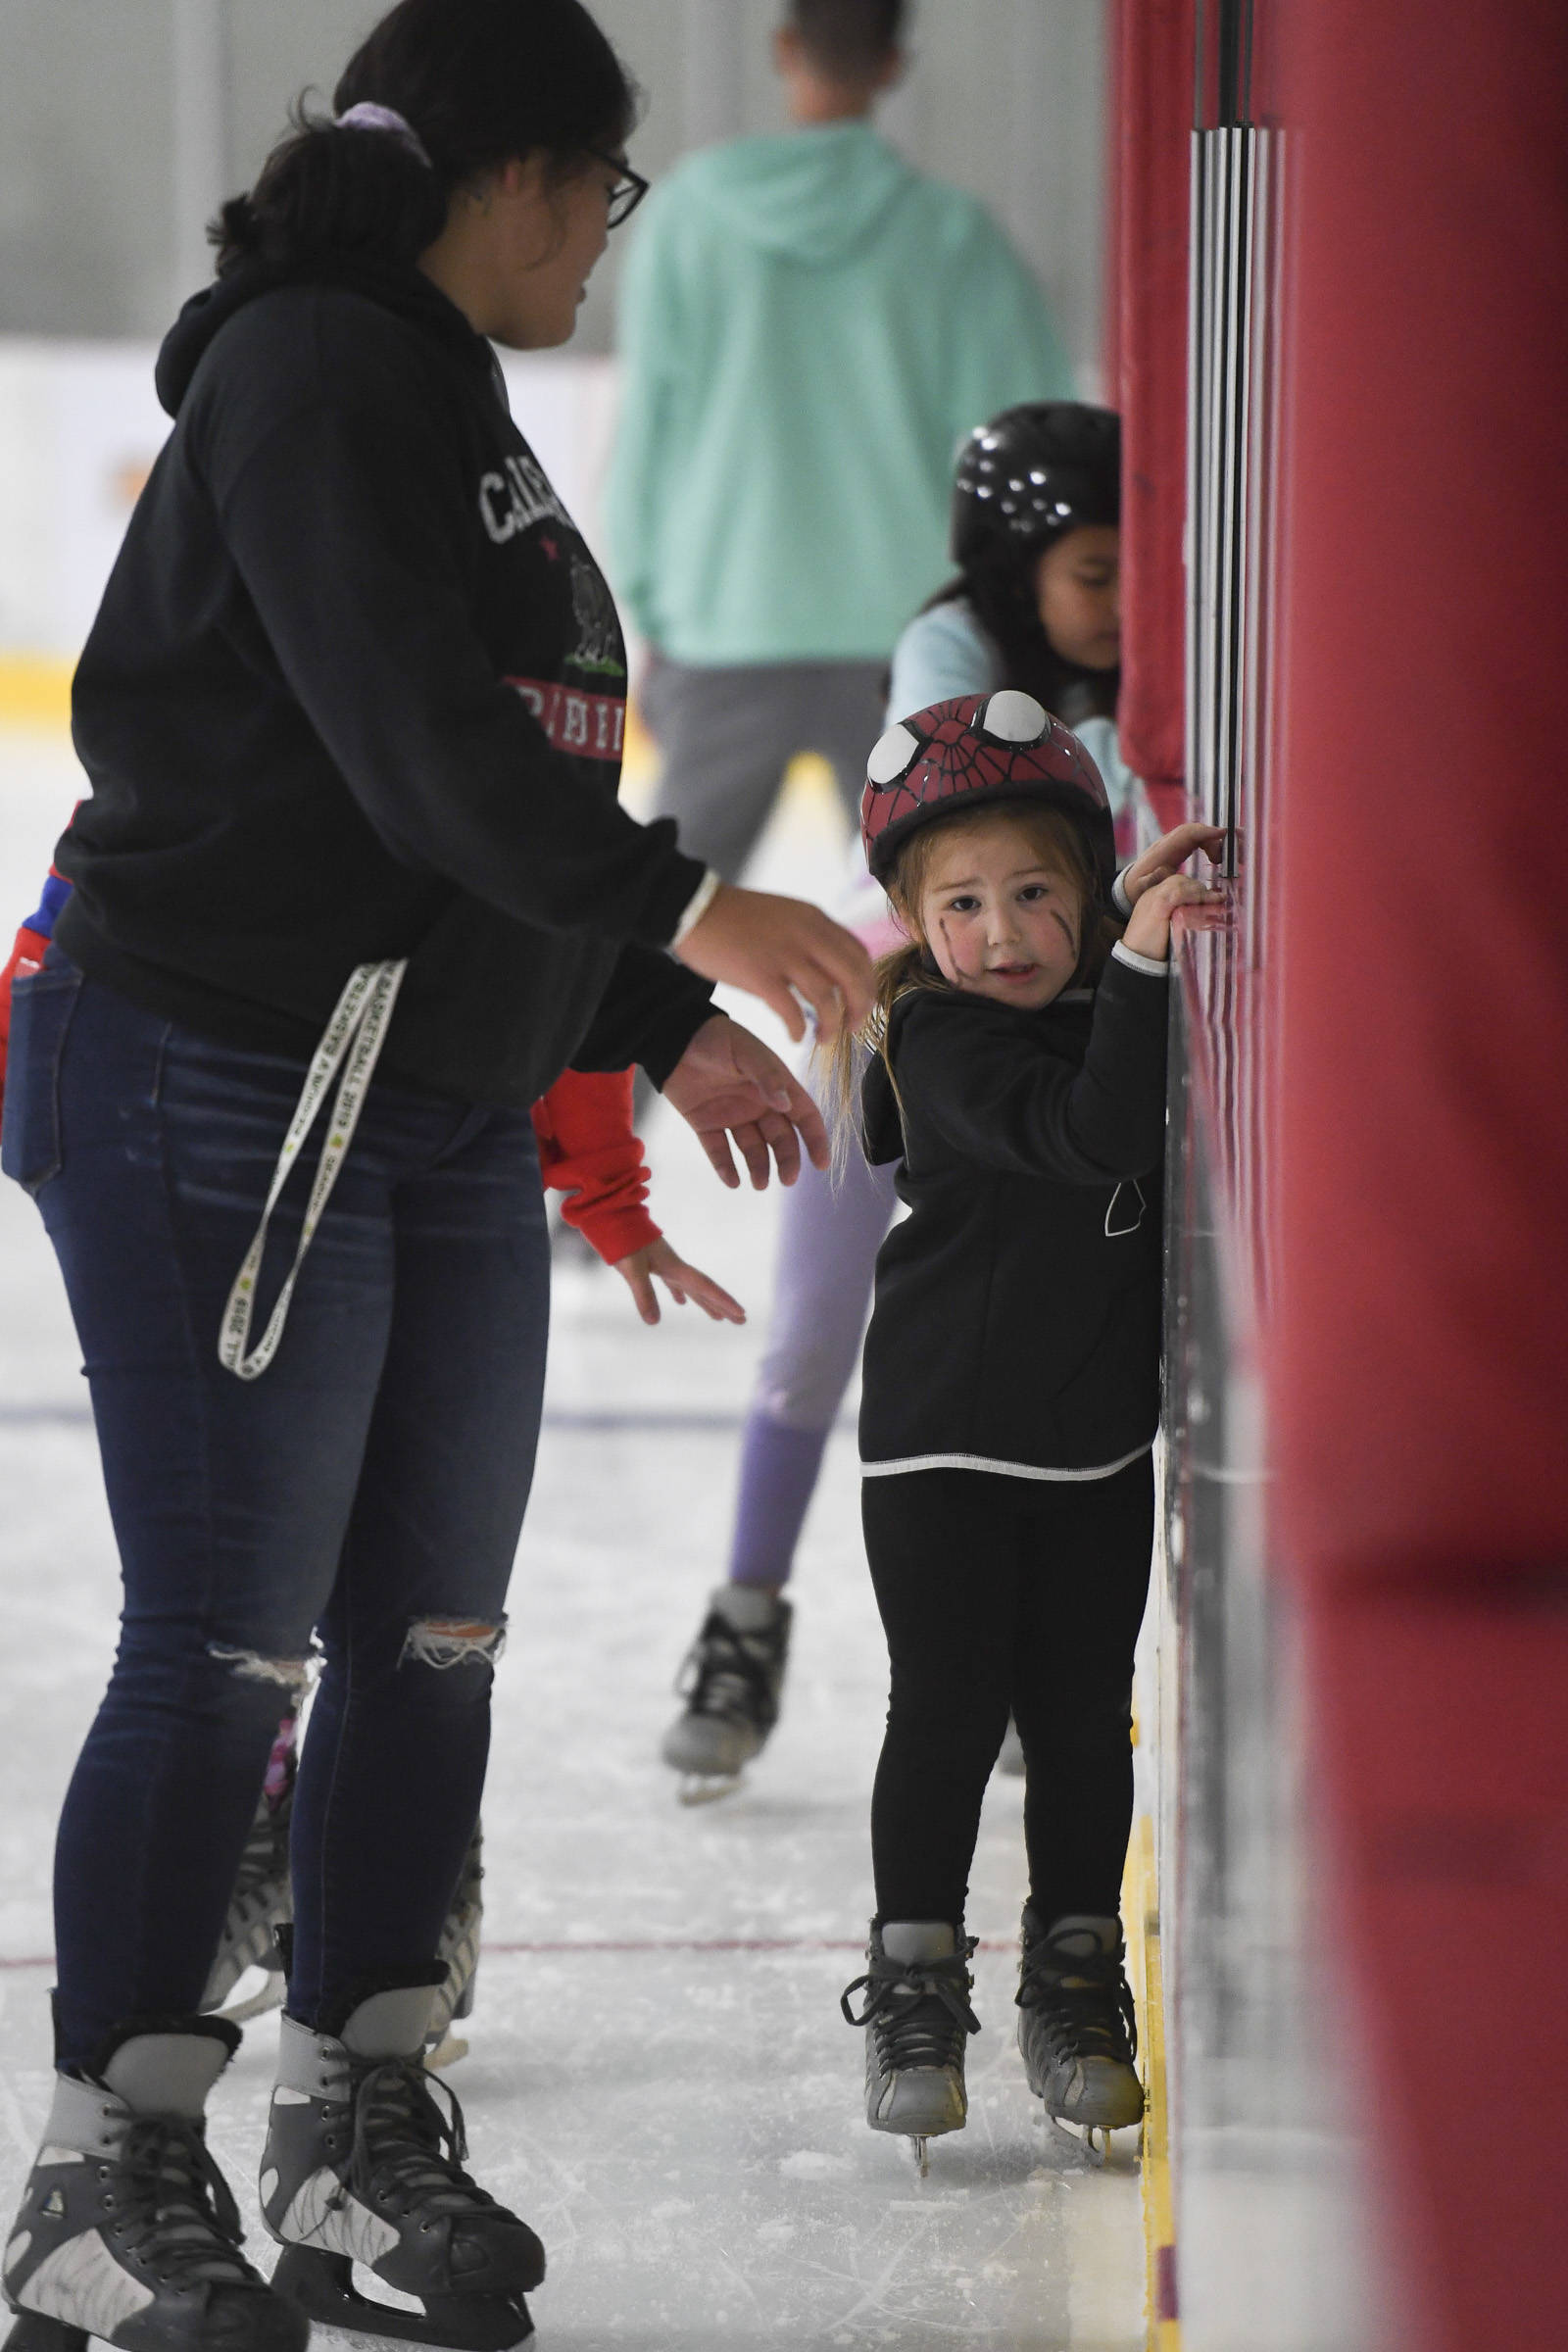 Juneau skaters and families take advantage of a free skate on the opening day at the Treadwell Arena on Monday, Aug. 5, 2019. (Michael Penn | Juneau Empire)